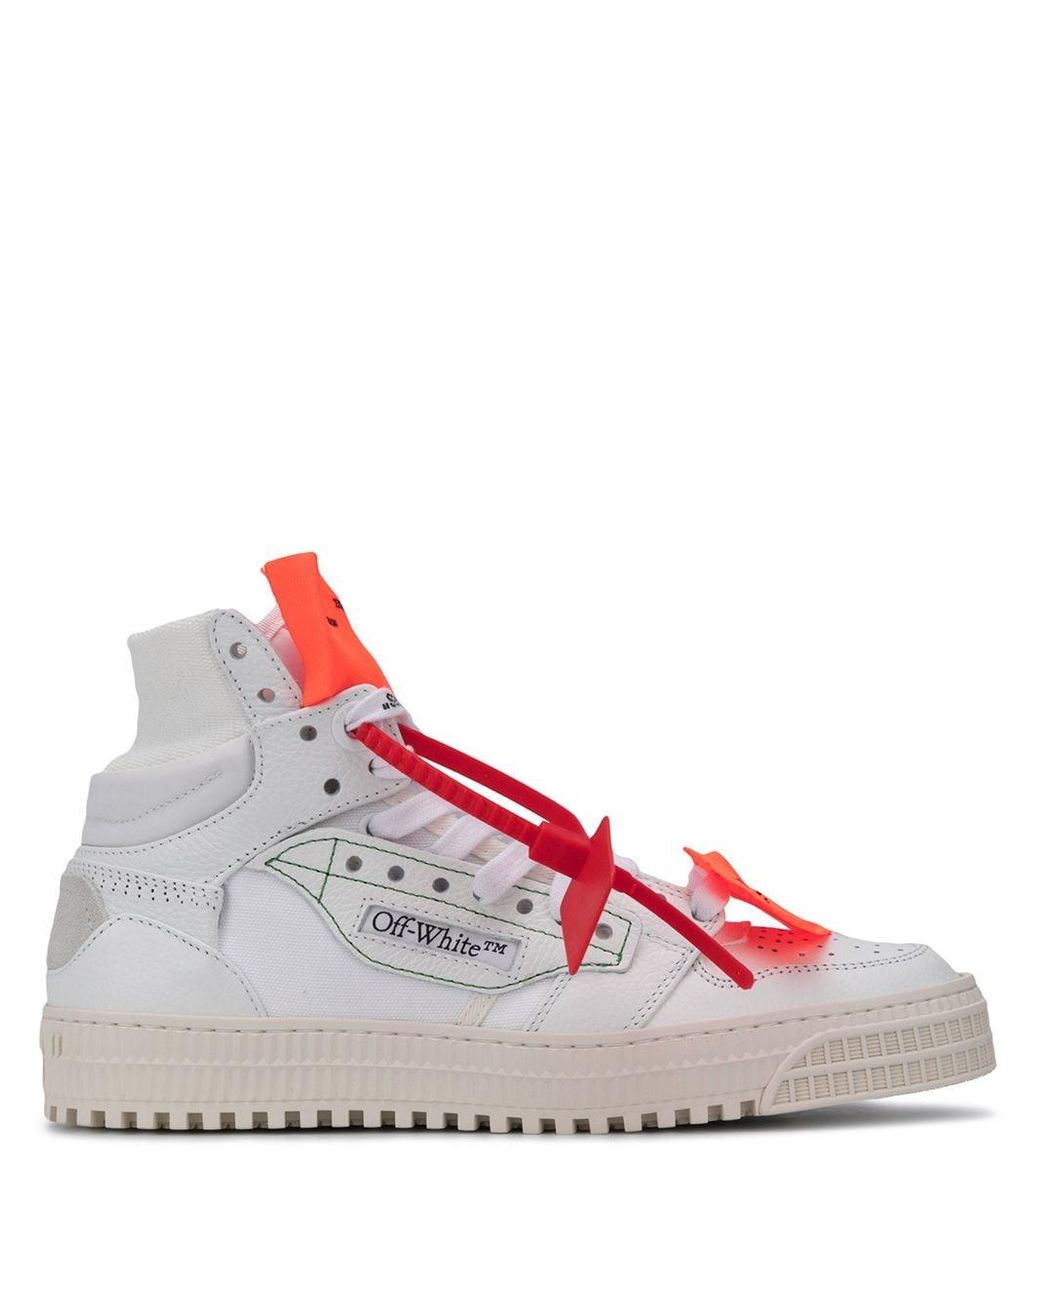 Off-White c/o Virgil Abloh Leather White Off-court 3.0 High-top 